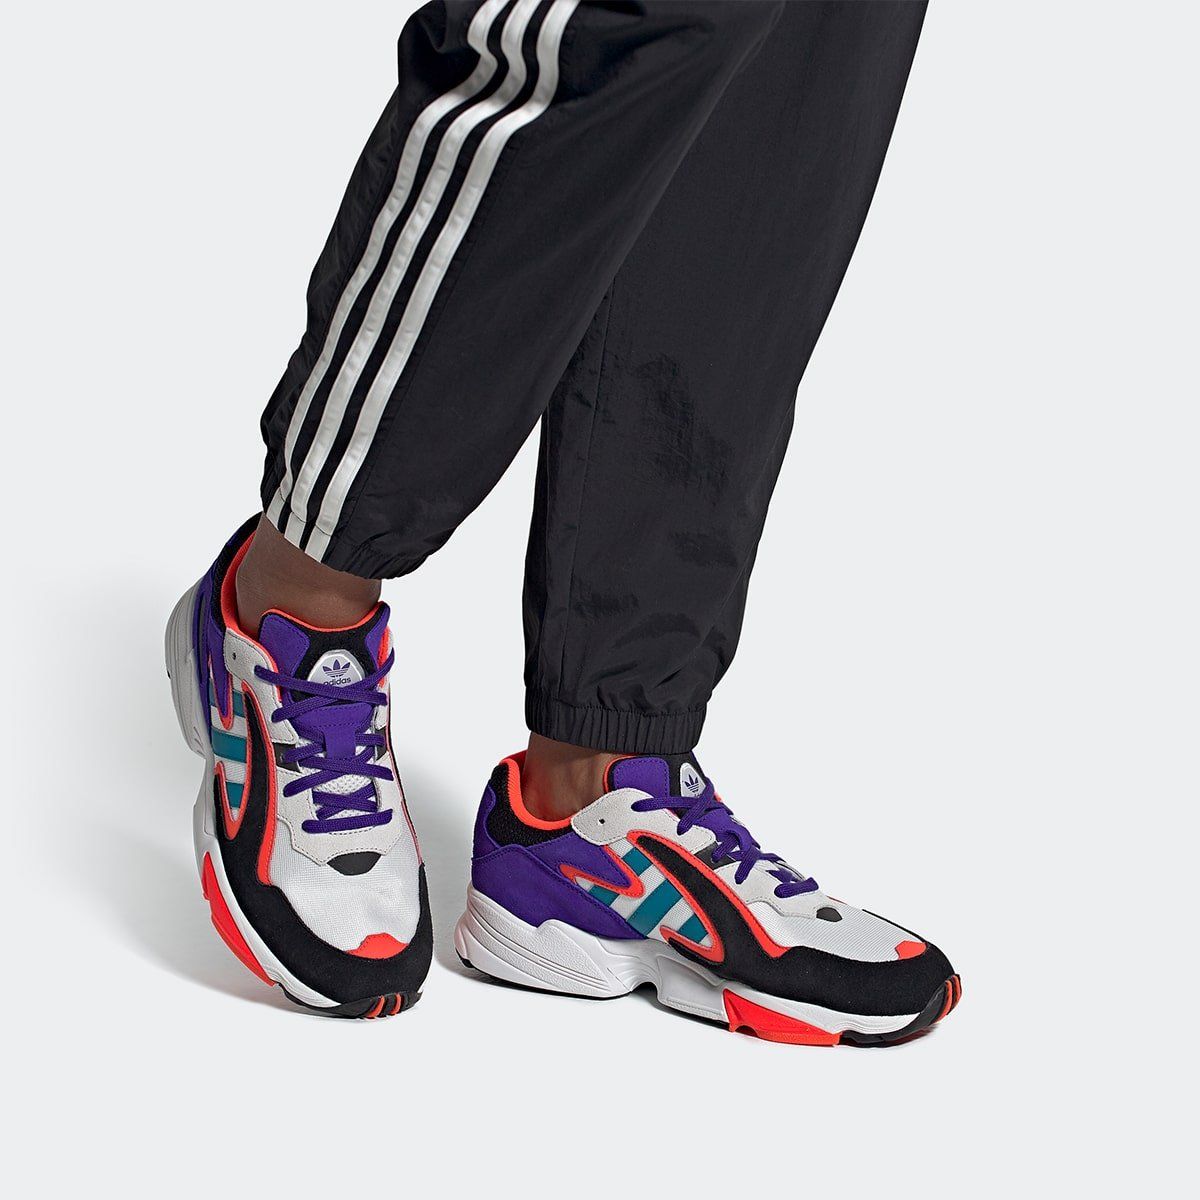 adidas Yung-96 Chasm Turns Up in an 